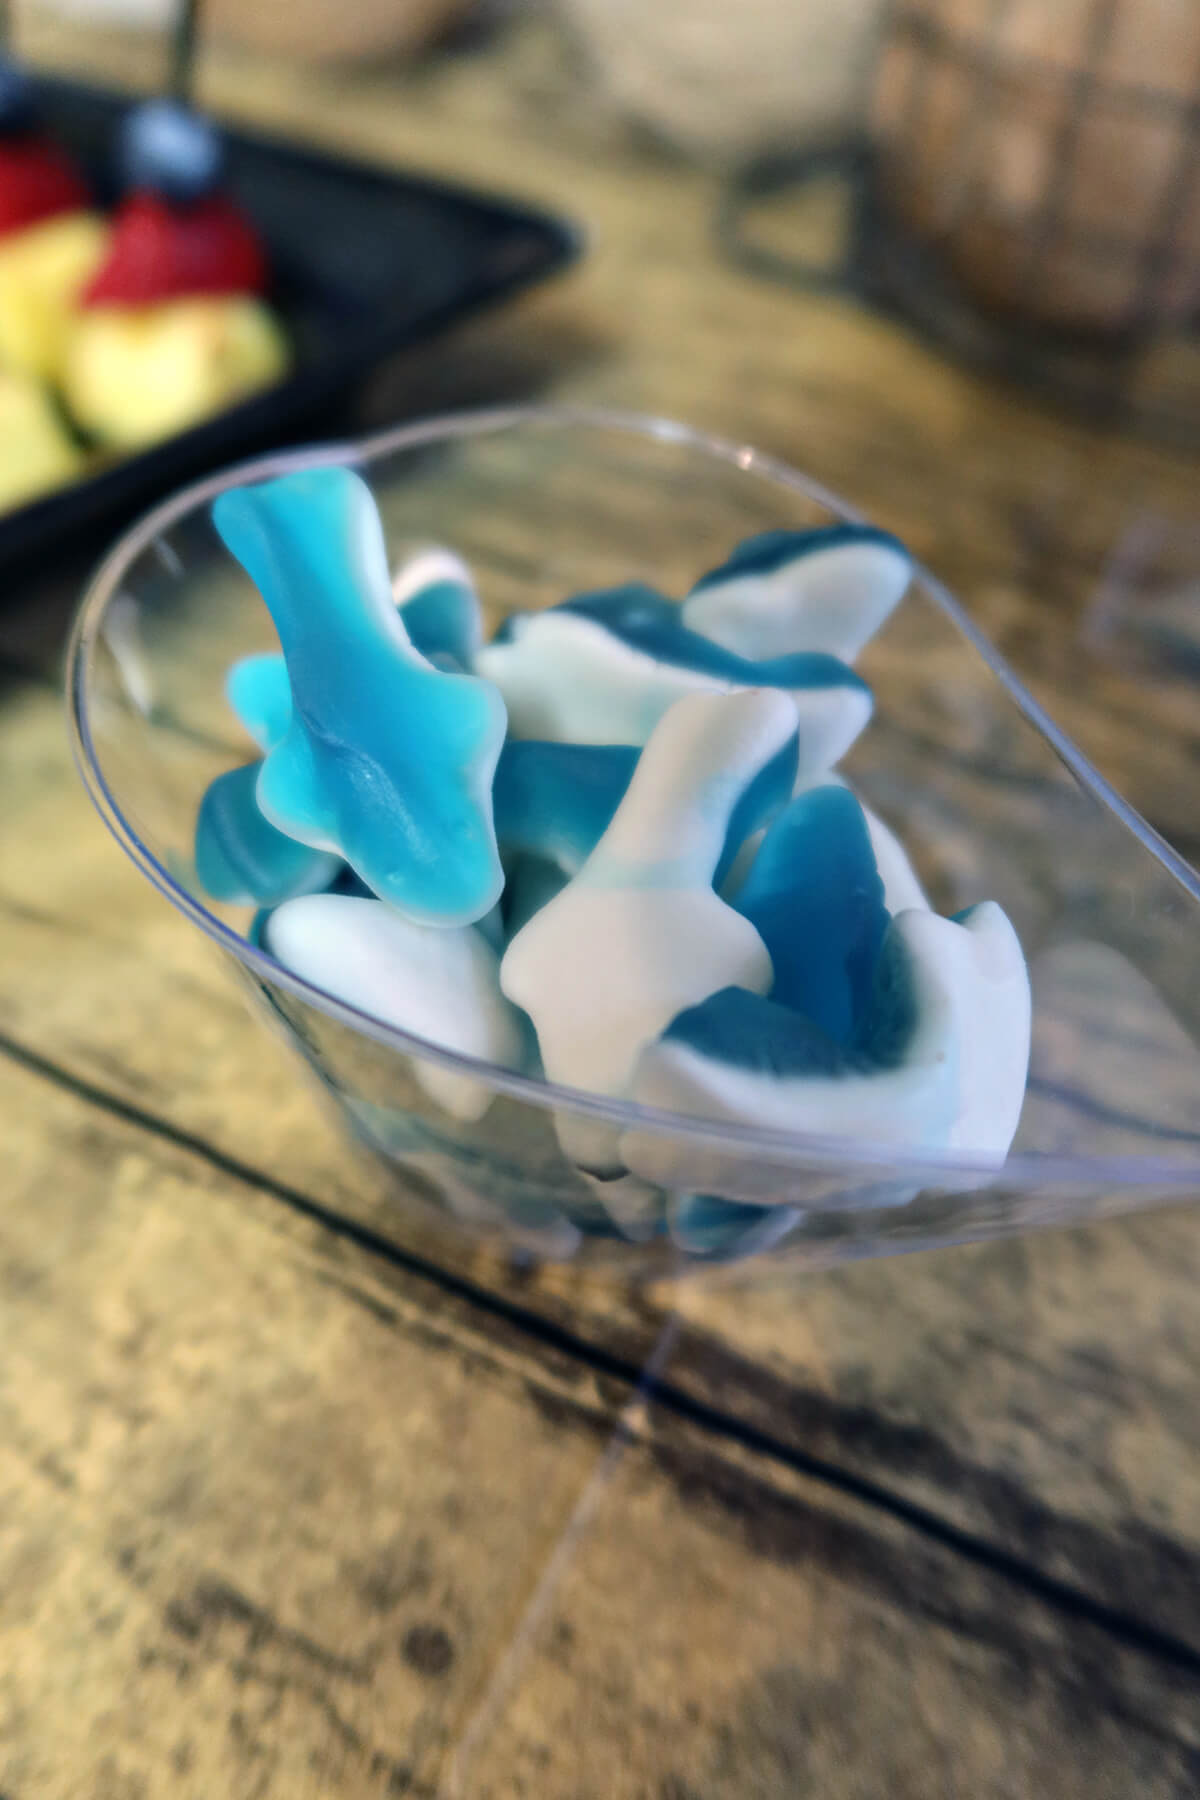 gummy sharks for a pirate party